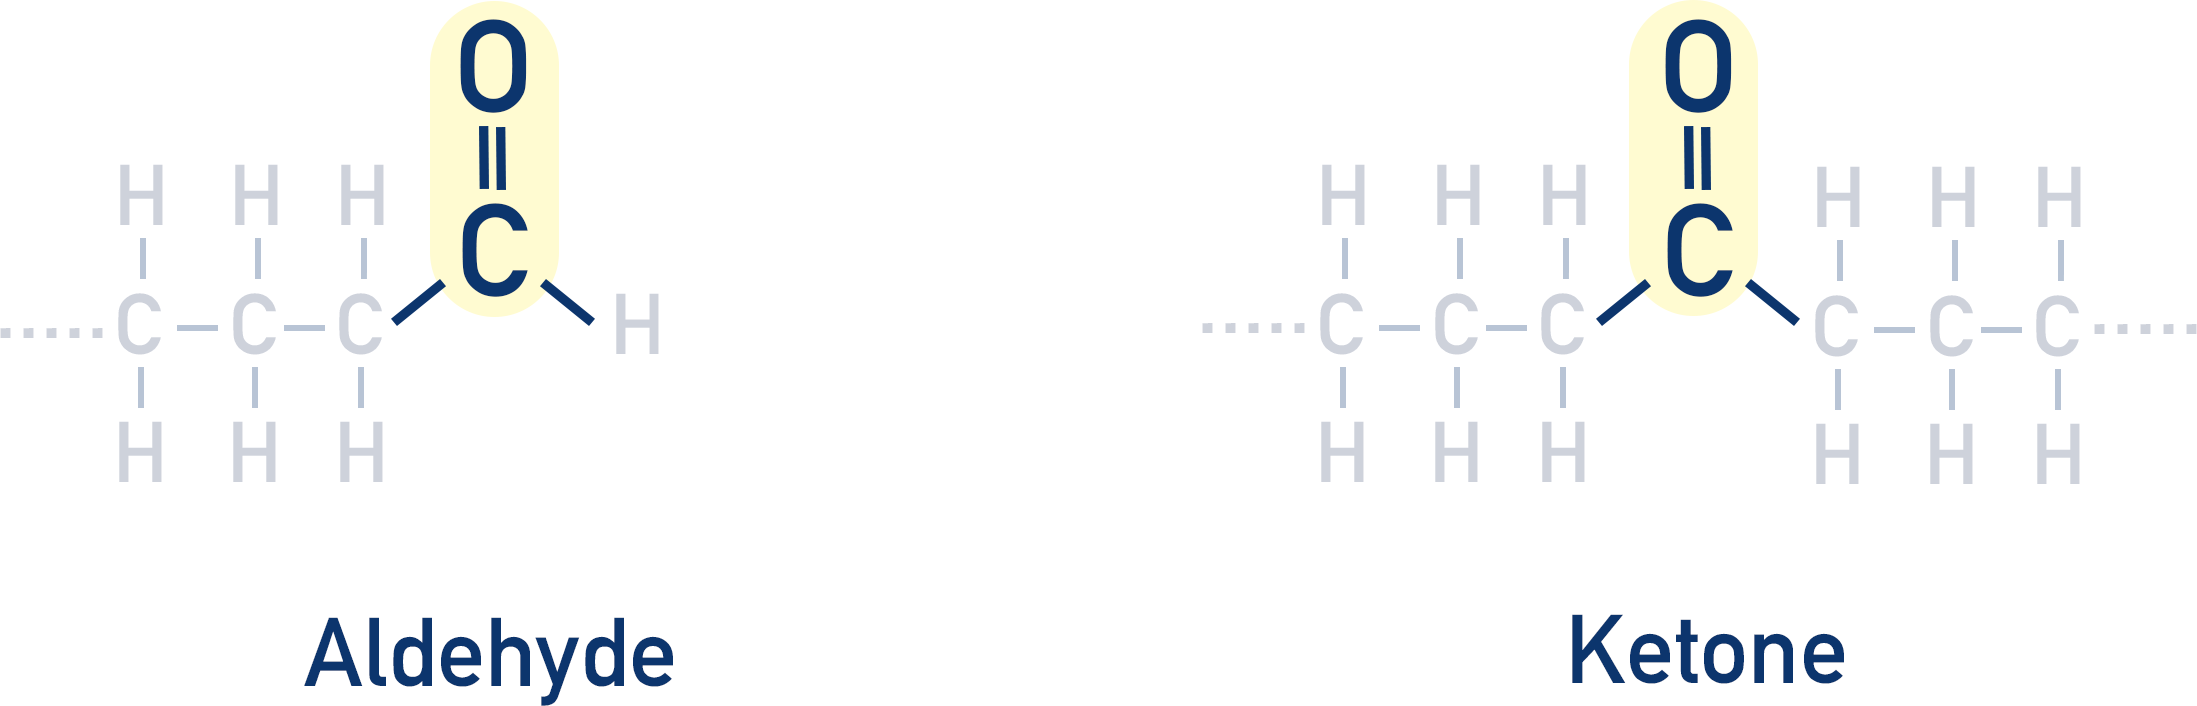 aldehyde and ketone chain position carbonyl